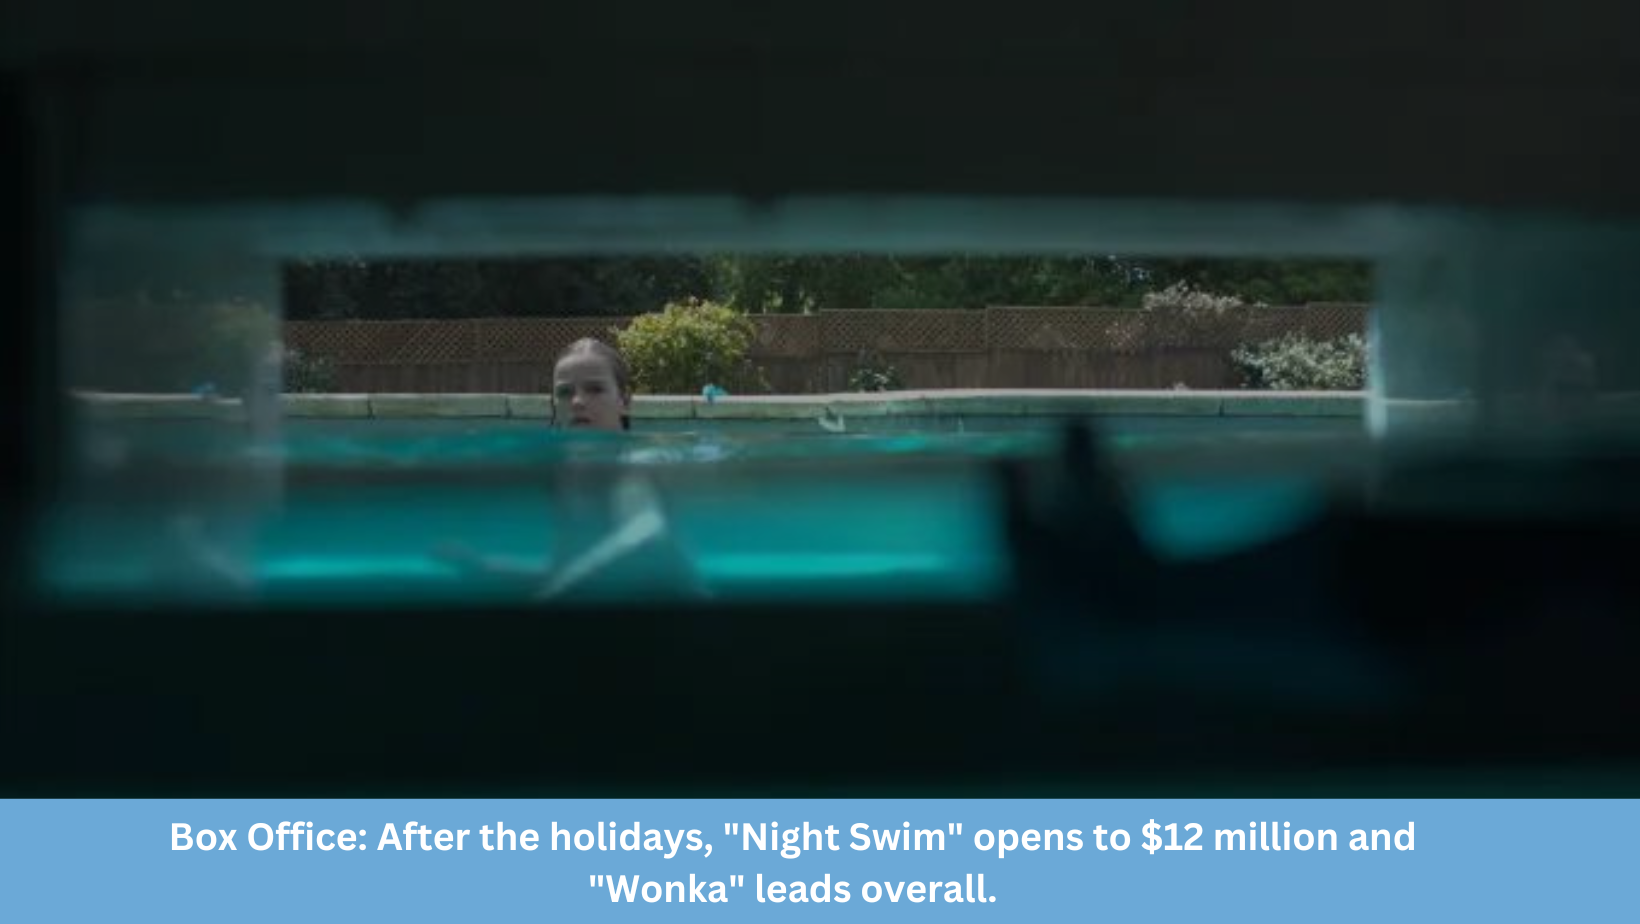 Box Office: After the holidays, "Night Swim" opens to $12 million and "Wonka" leads overall.